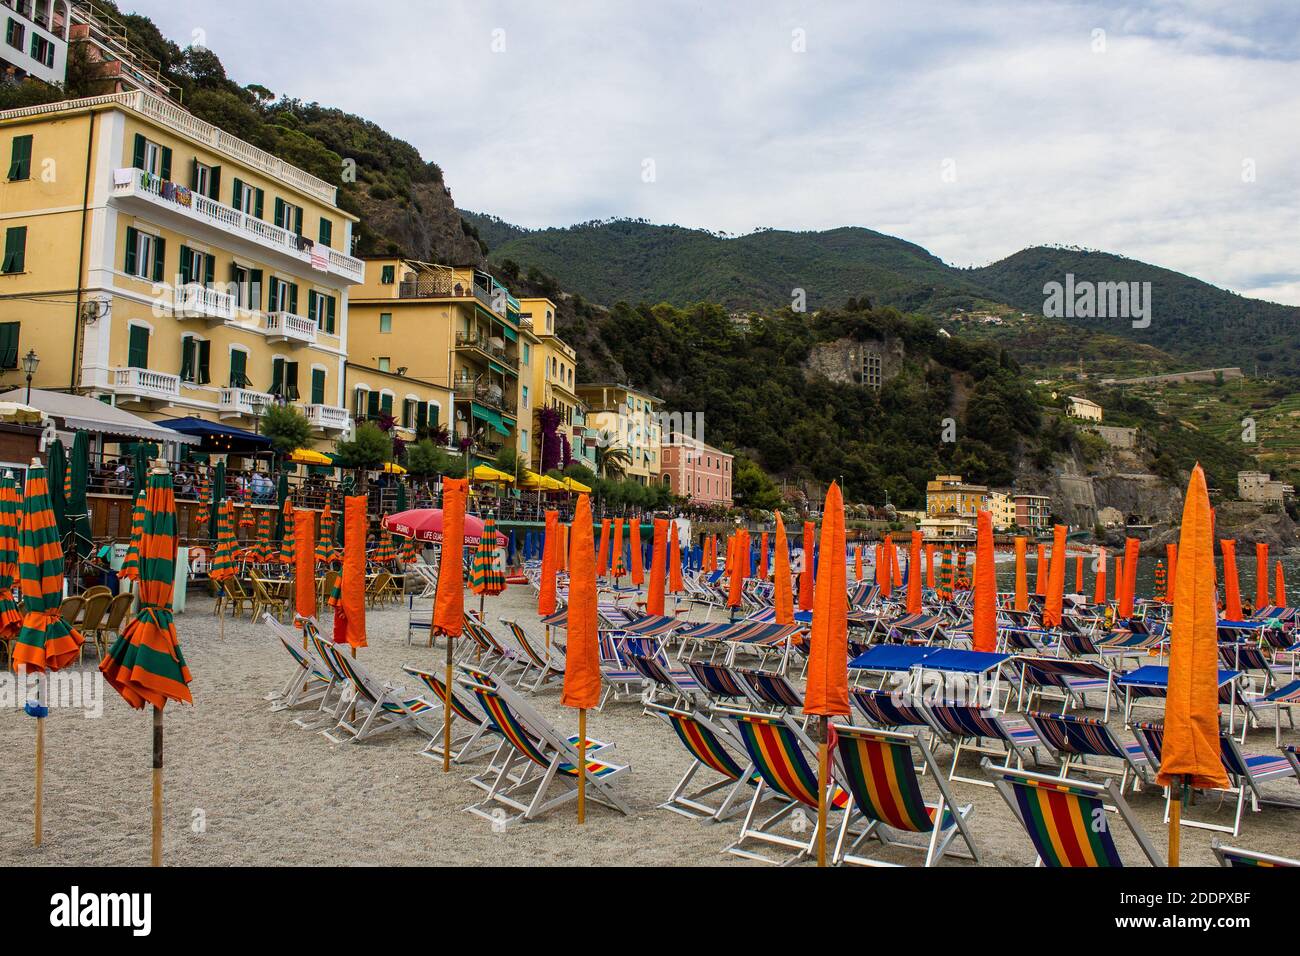 Monterosso al Mare, Italy - July 8, 2017: People Sitting in a Cafe on Fegina Beach with Traditional Colorful Houses in in the Background on a Summer D Stock Photo